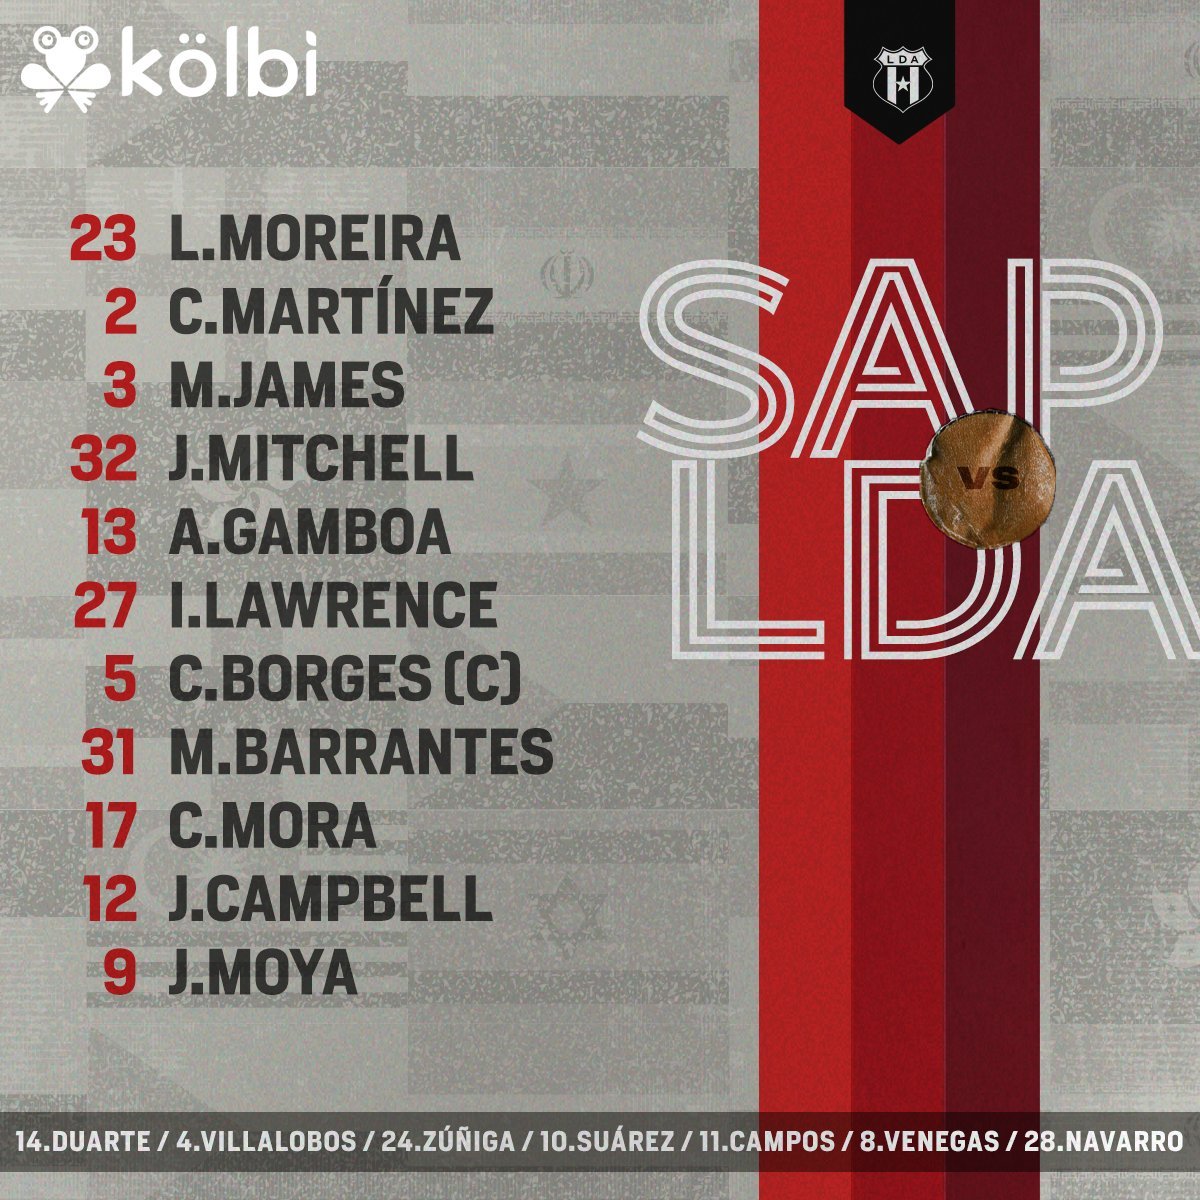 🇨🇷 Primera División - Clausura Final

Manjrekar James has the start for @ldacr this evening opposite Abraham Madríz serving as the backup goalkeeper for @SaprissaOficial!

Alajuelense claimed a 1-0 win in the first leg of this final matchup.

#CanPL | #CanucksAbroad